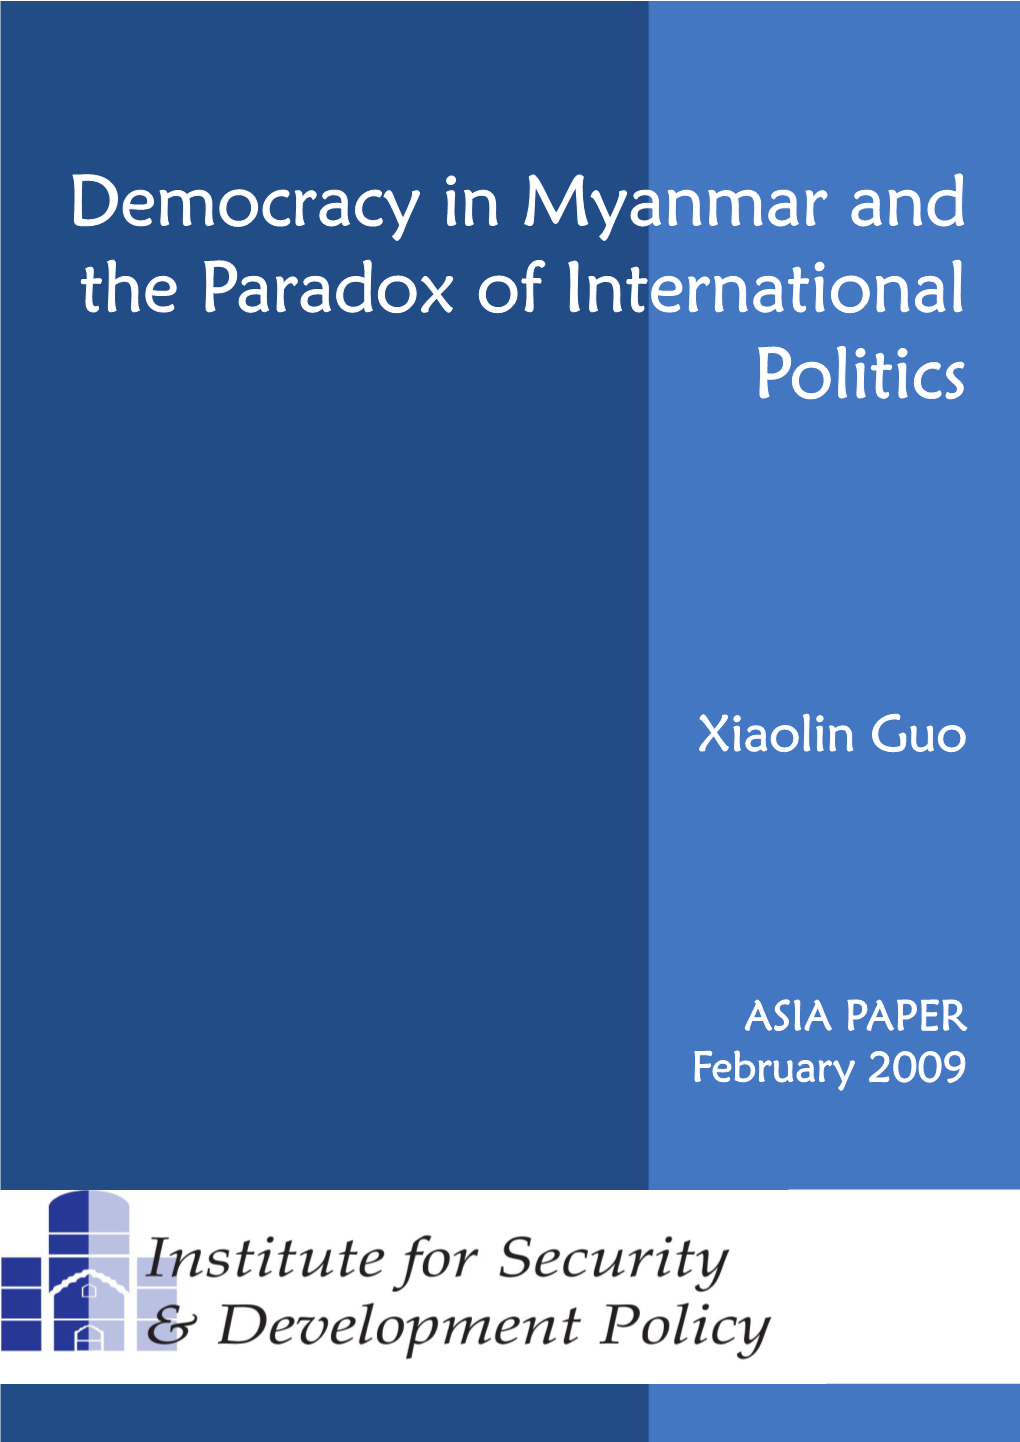 Democracy in Myanmar and the Paradox of International Politics